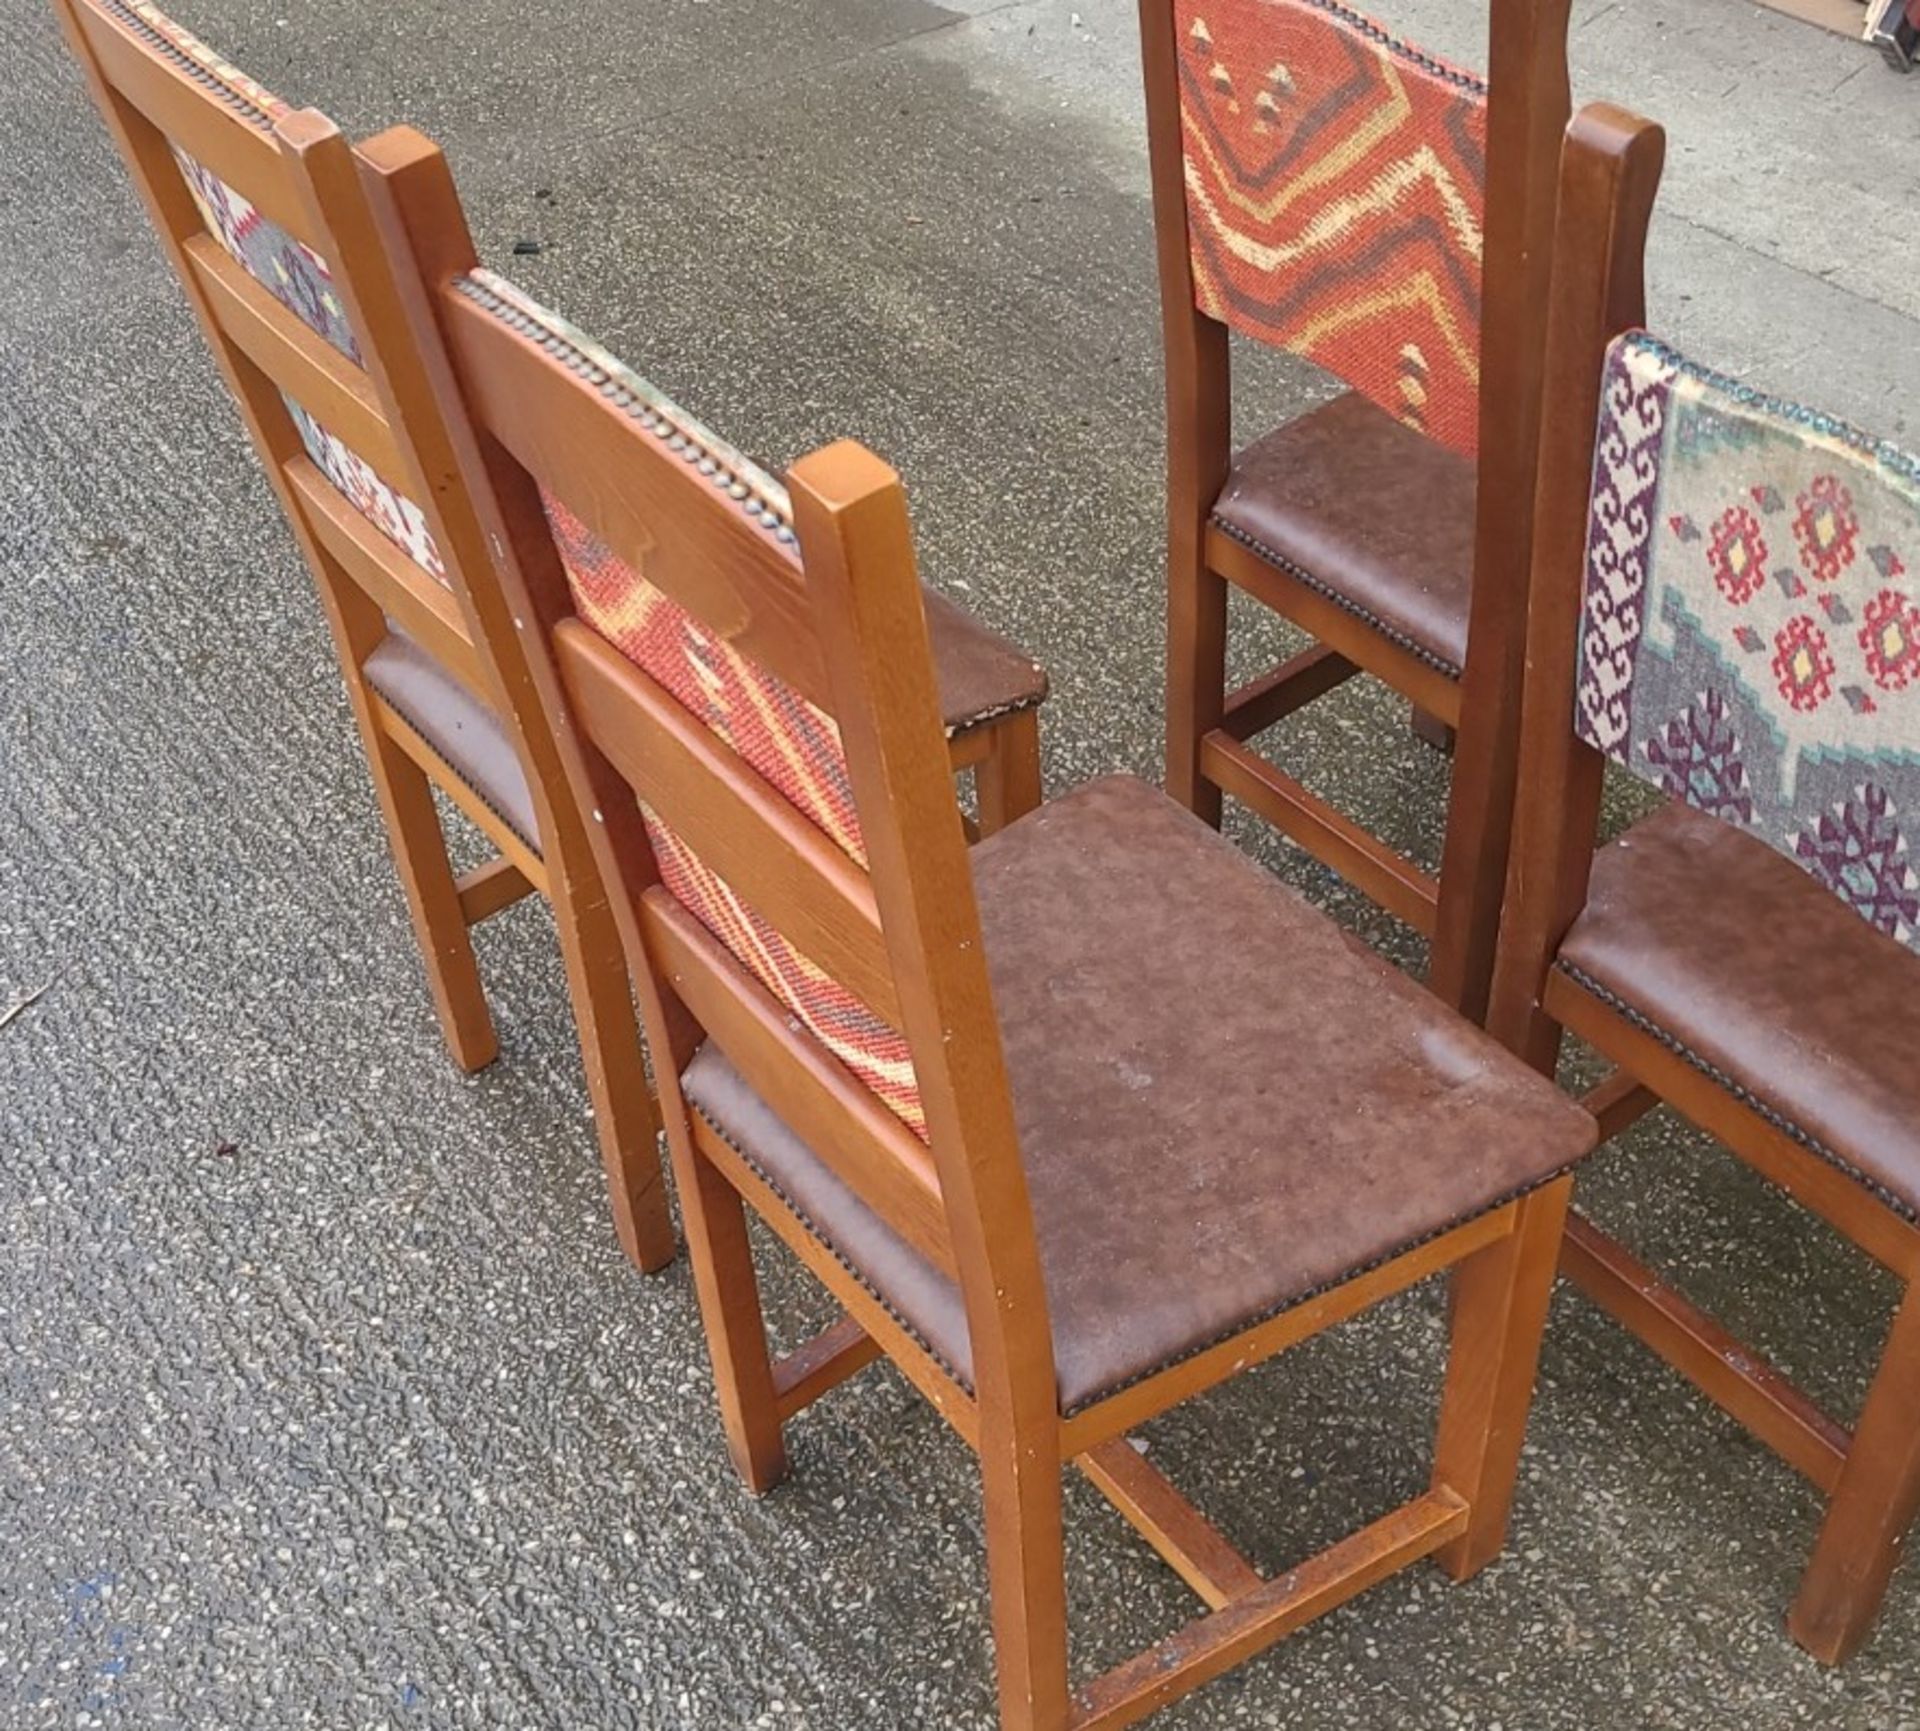 Set Of 4 x Aztec Print Dining Chairs With Faux Brown Leather Seating & Studded Seams - Image 2 of 5